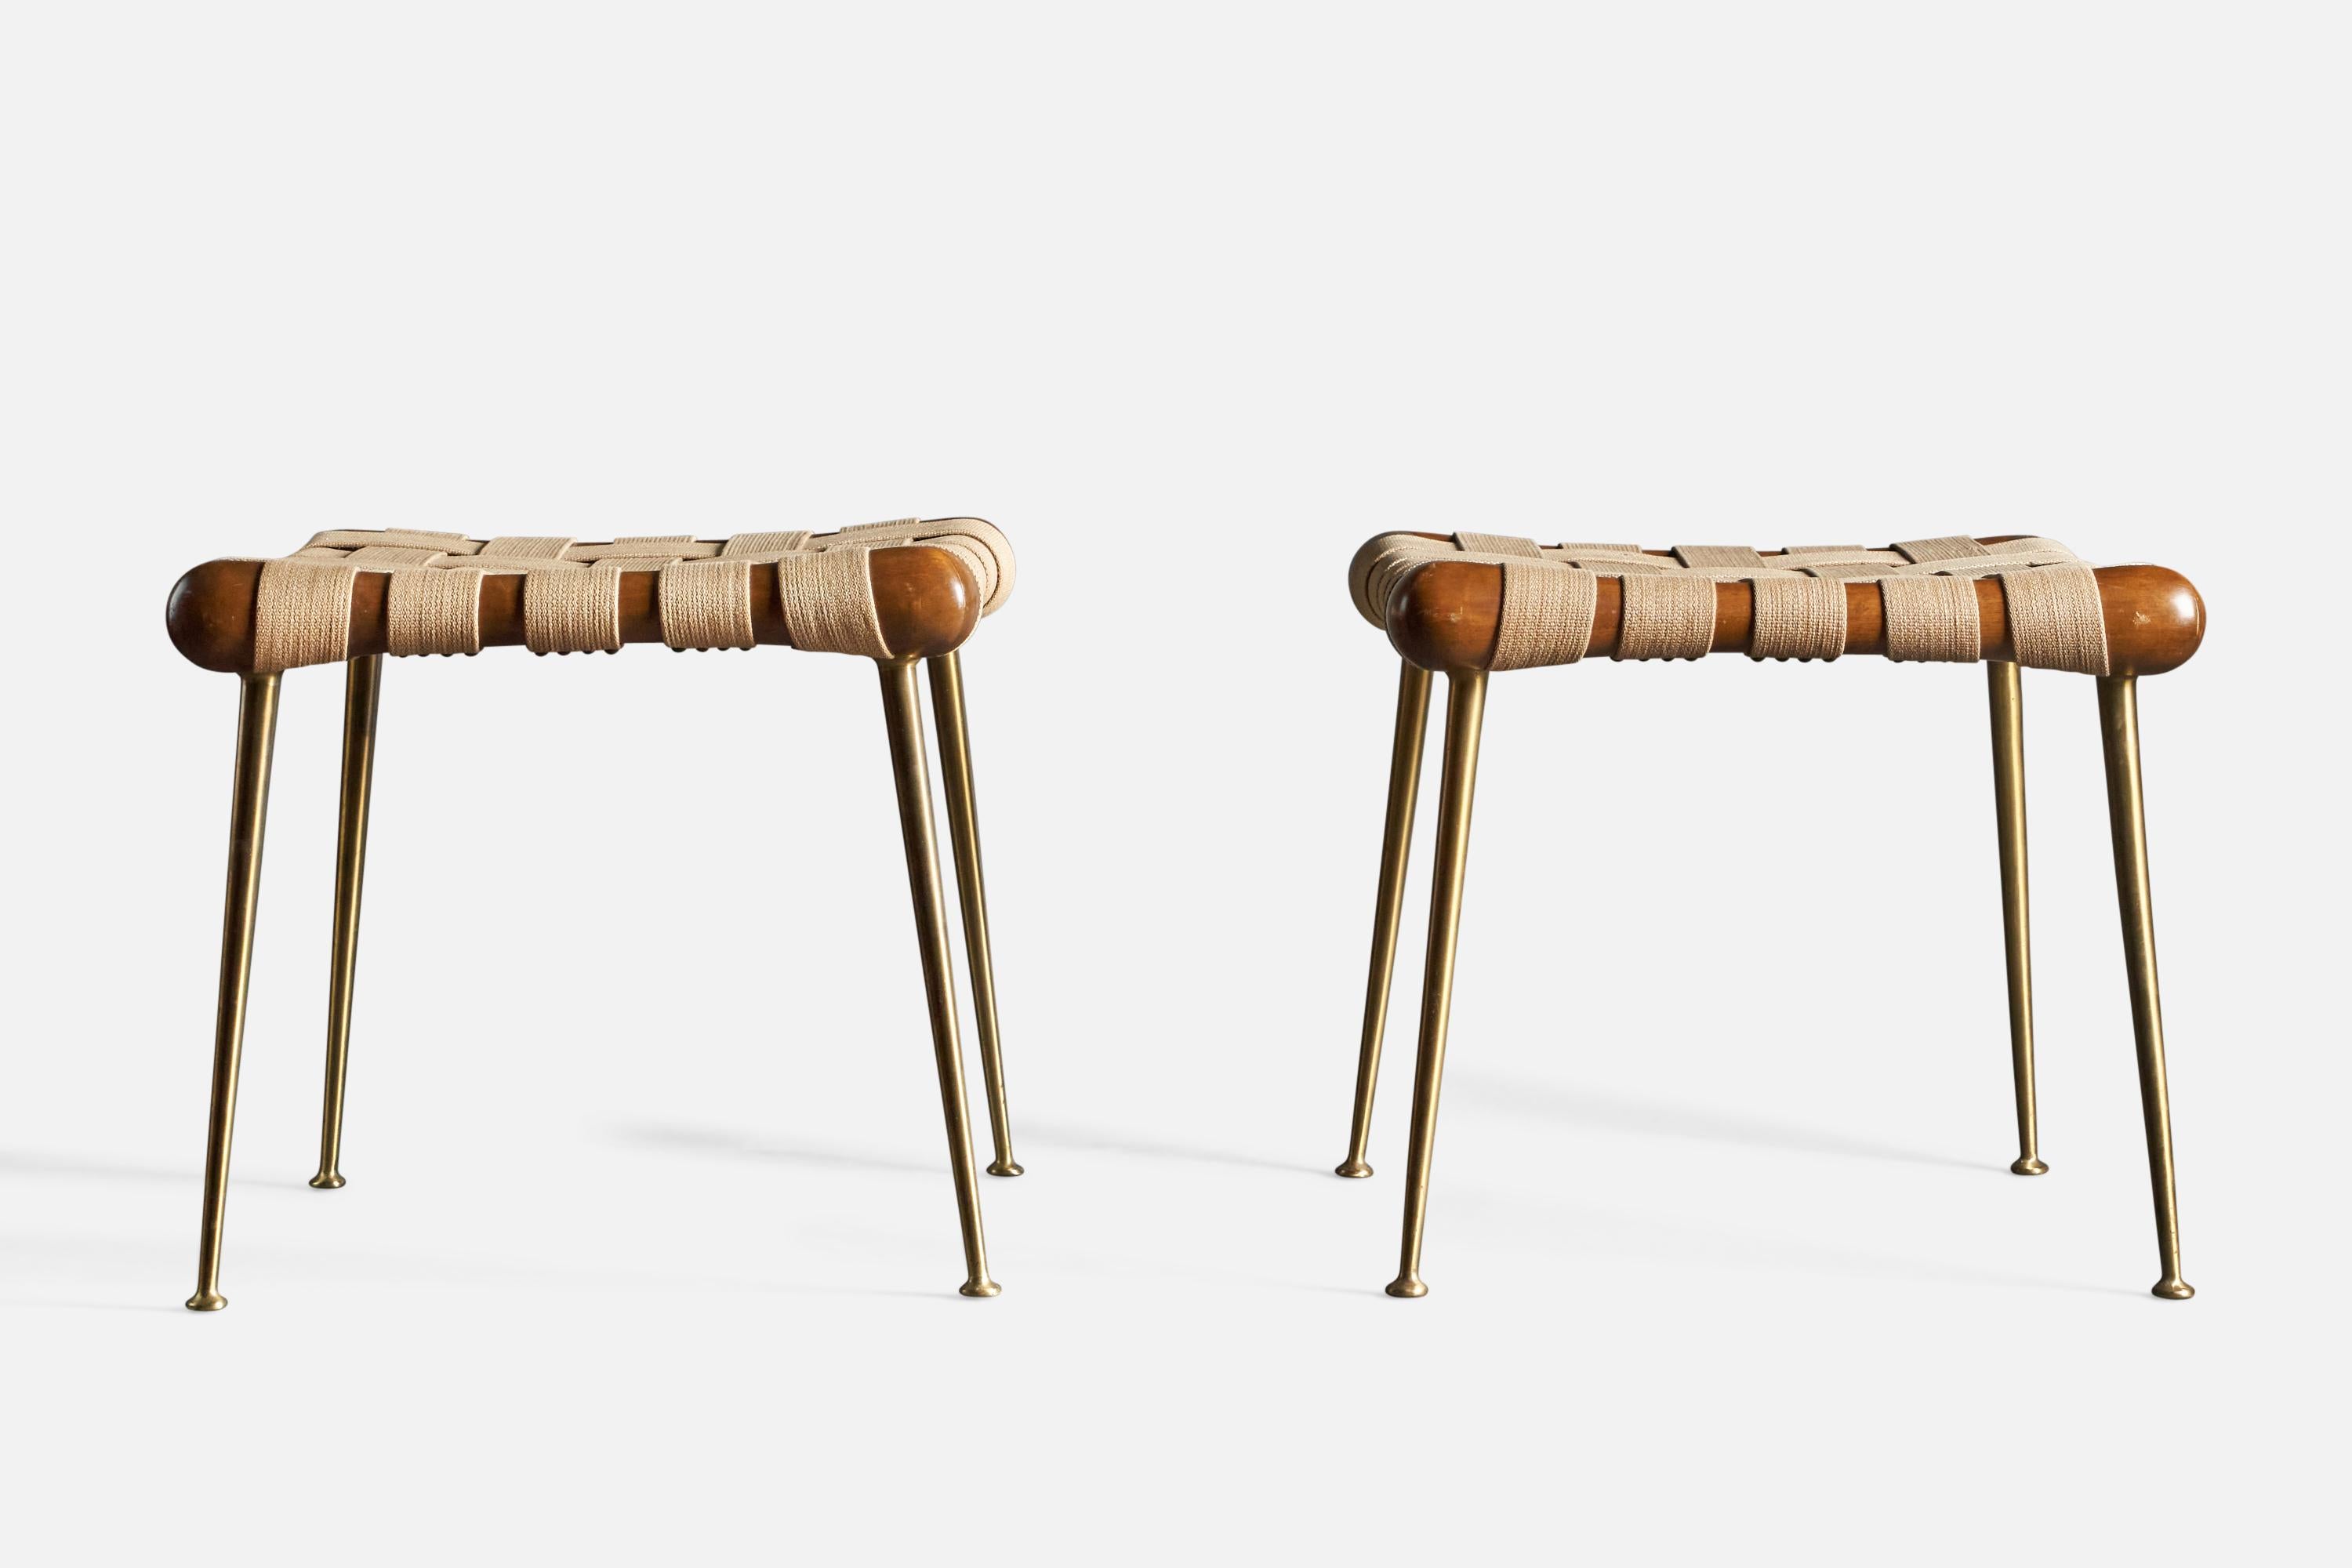 A pair of cotton, brass, and walnut stools, designed by T.H. Robsjohn-Gibbings, and produced by Widdicomb, Grand Rapids, Michigan, USA, 1950s.